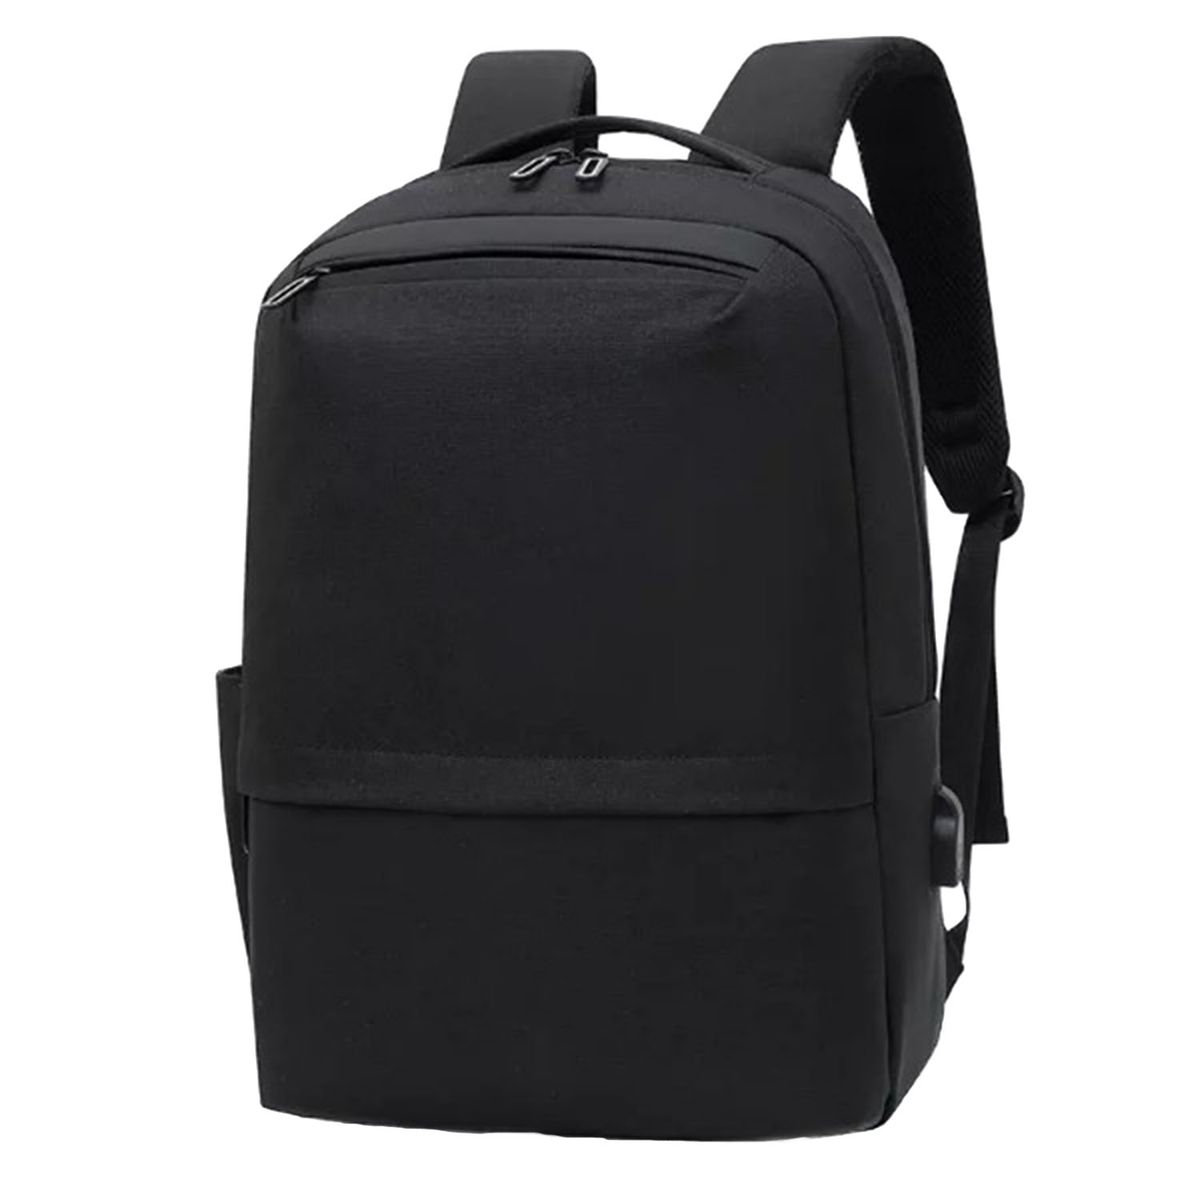 USB Antitheft Travelling Laptop Backpack | Shop Today. Get it Tomorrow ...